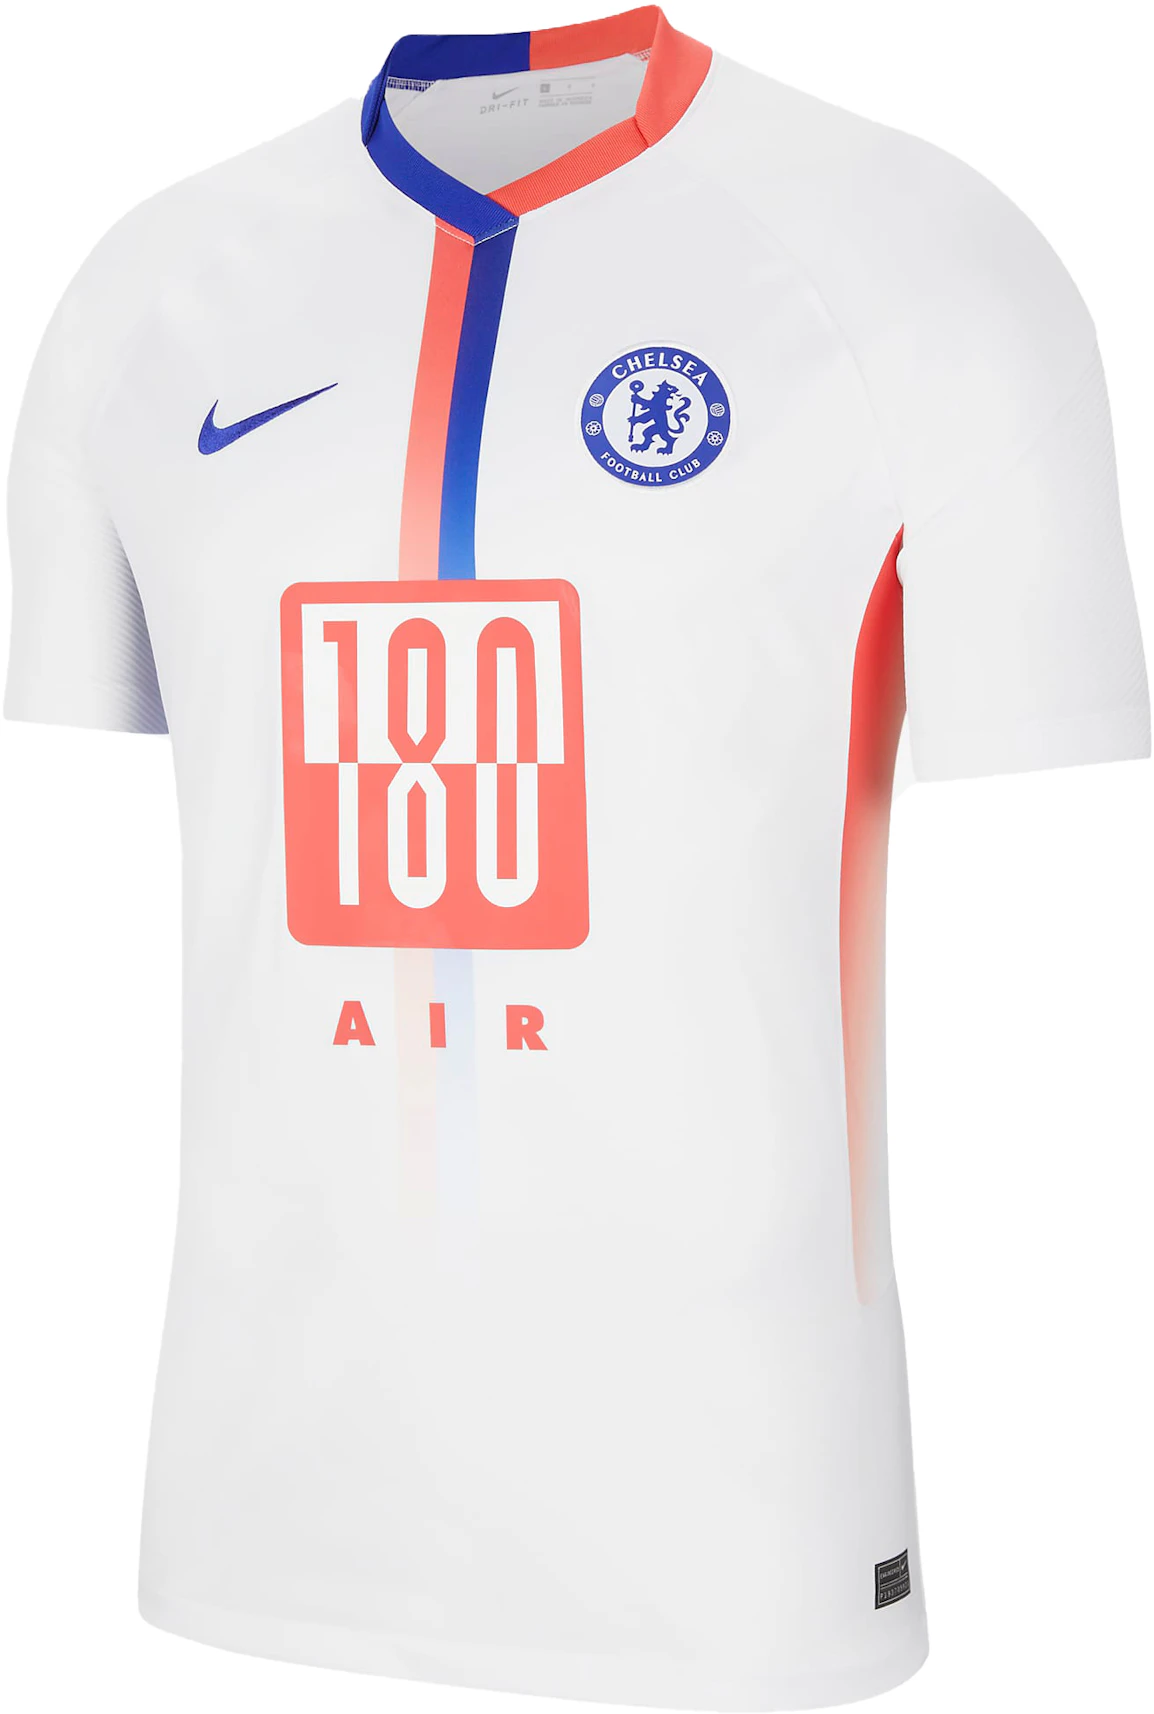 Onnodig versnelling lucht Nike Chelsea F.C. Stadium Air Max Men's Football Shirt White/Concord - SS21  - US